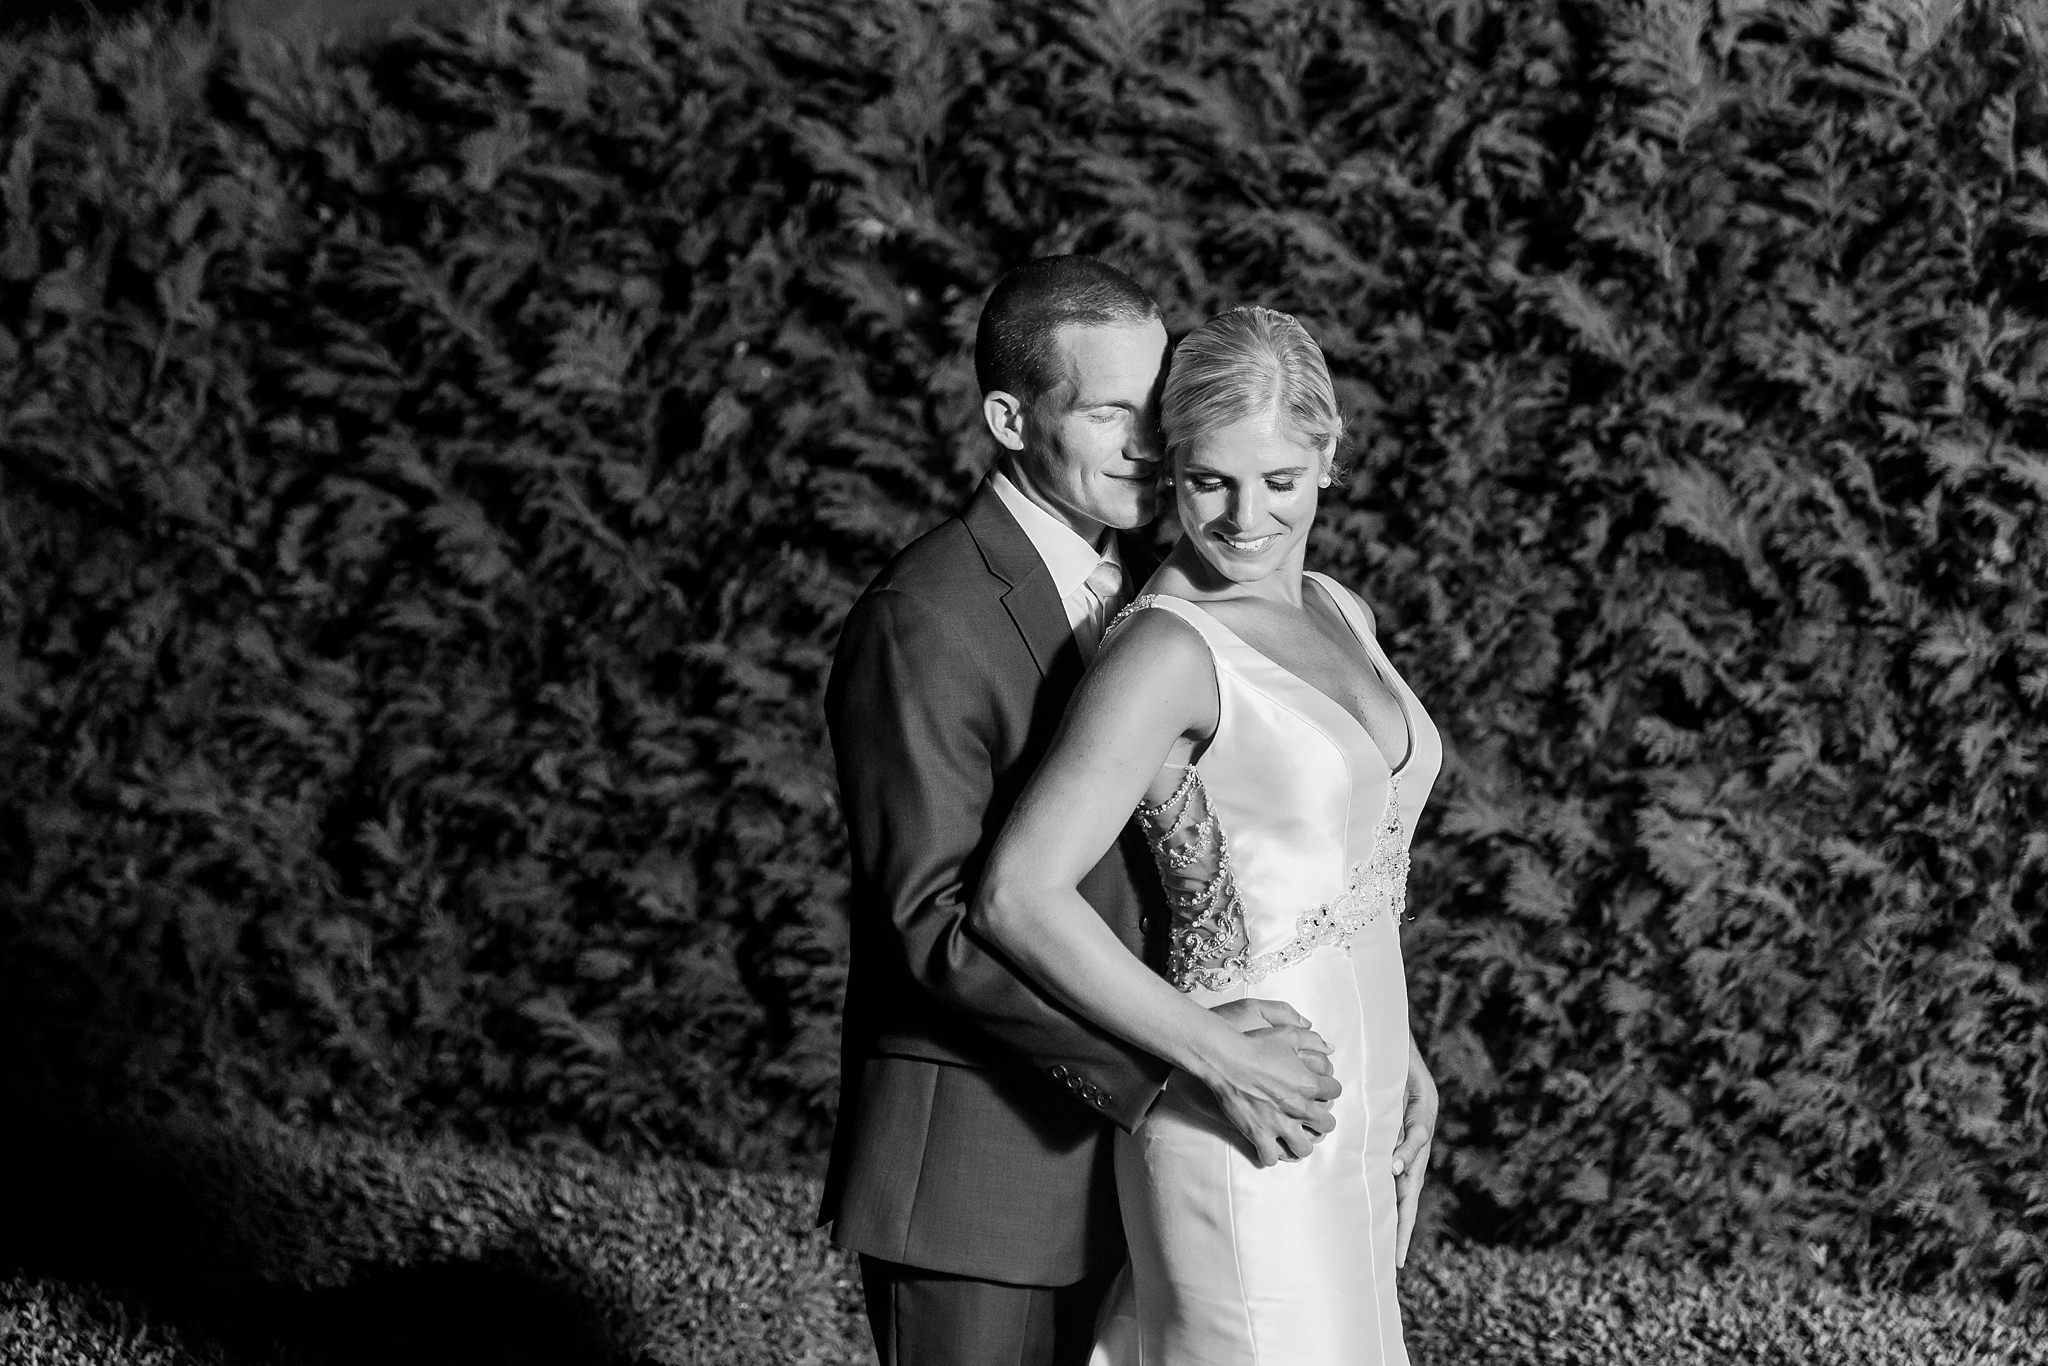 casually-chic-modern-wedding-photos-at-the-chapman-house-in-rochester-michigan-by-courtney-carolyn-photography_0064.jpg